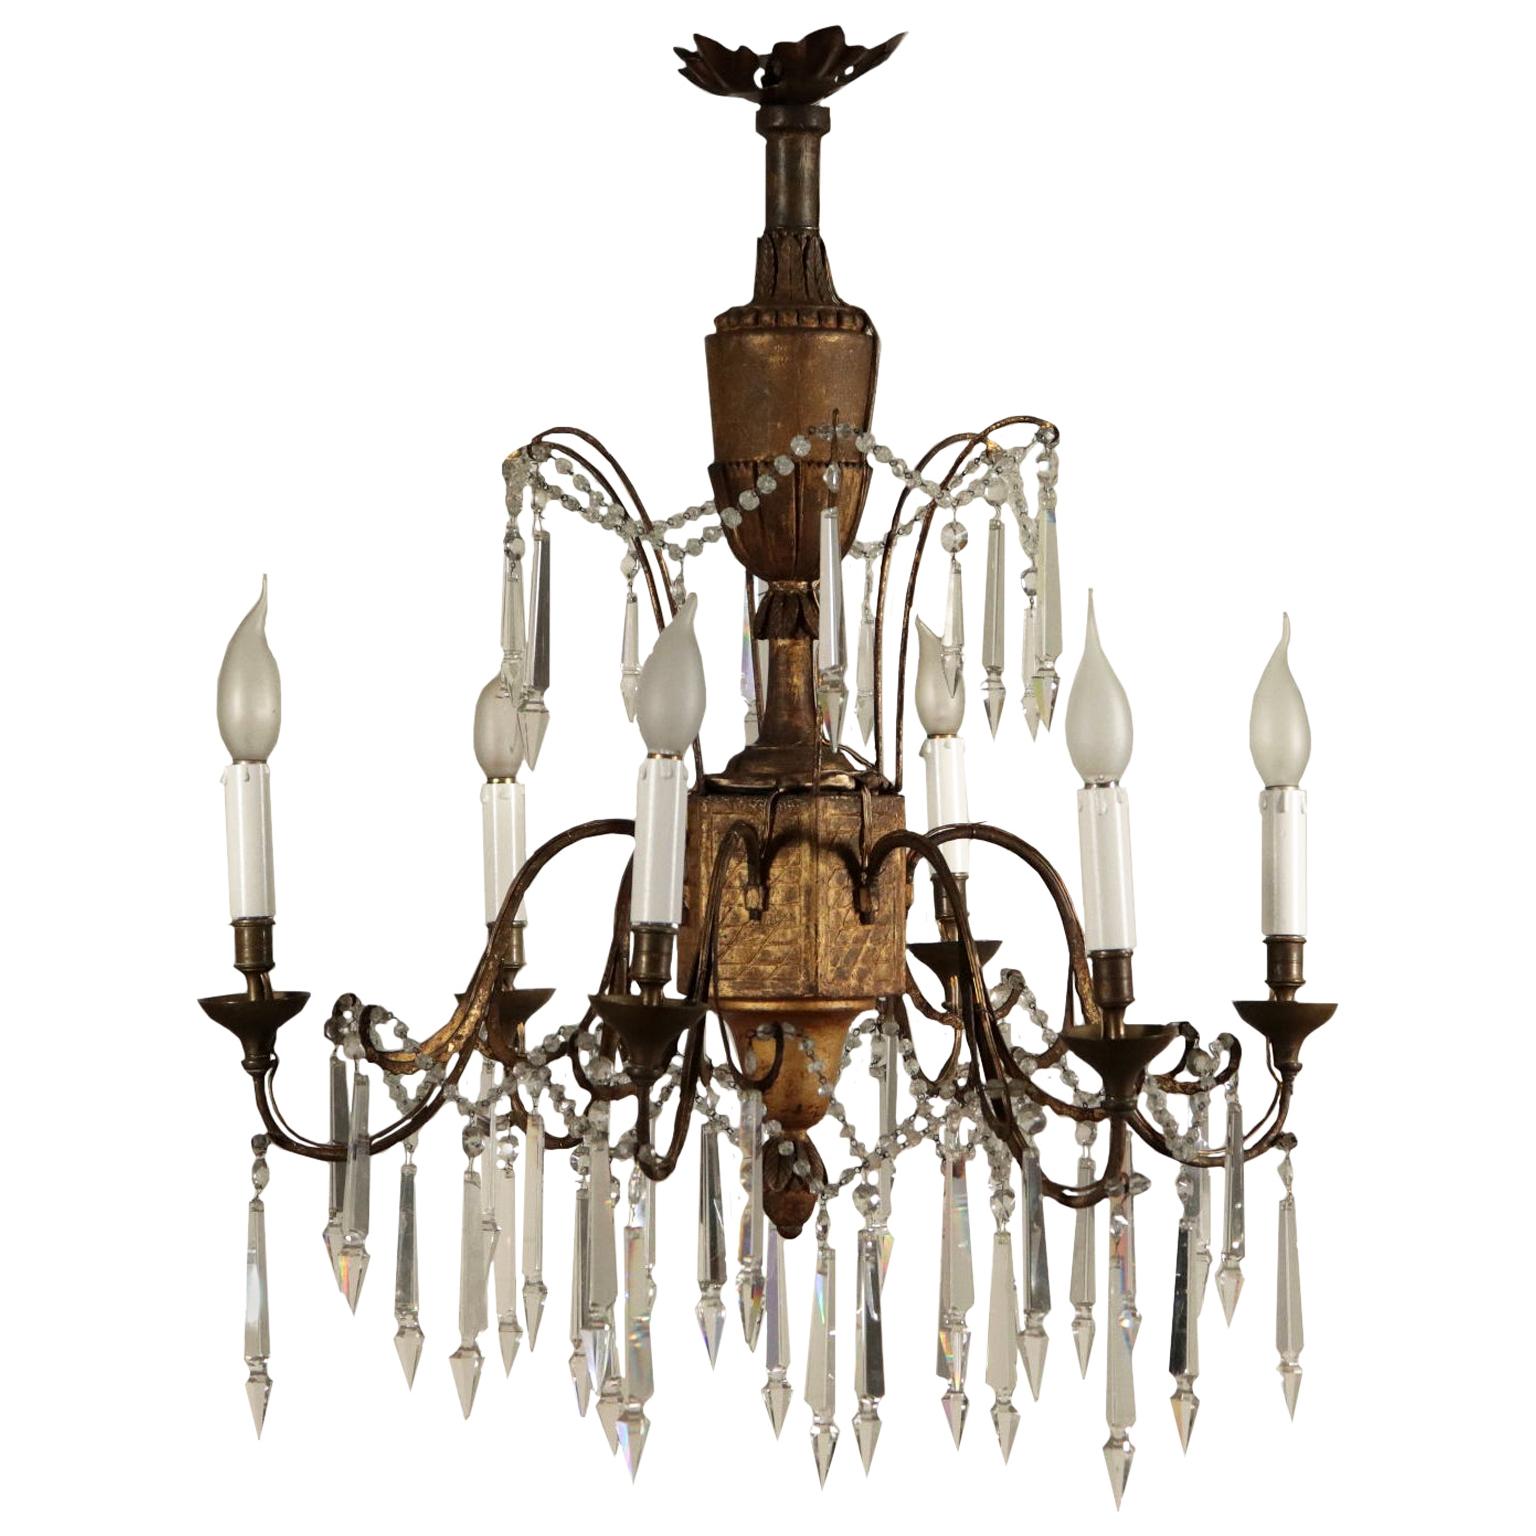 Neoclassical Chandelier, Carved Wood and Wrought Iron, Italy, 18th Century